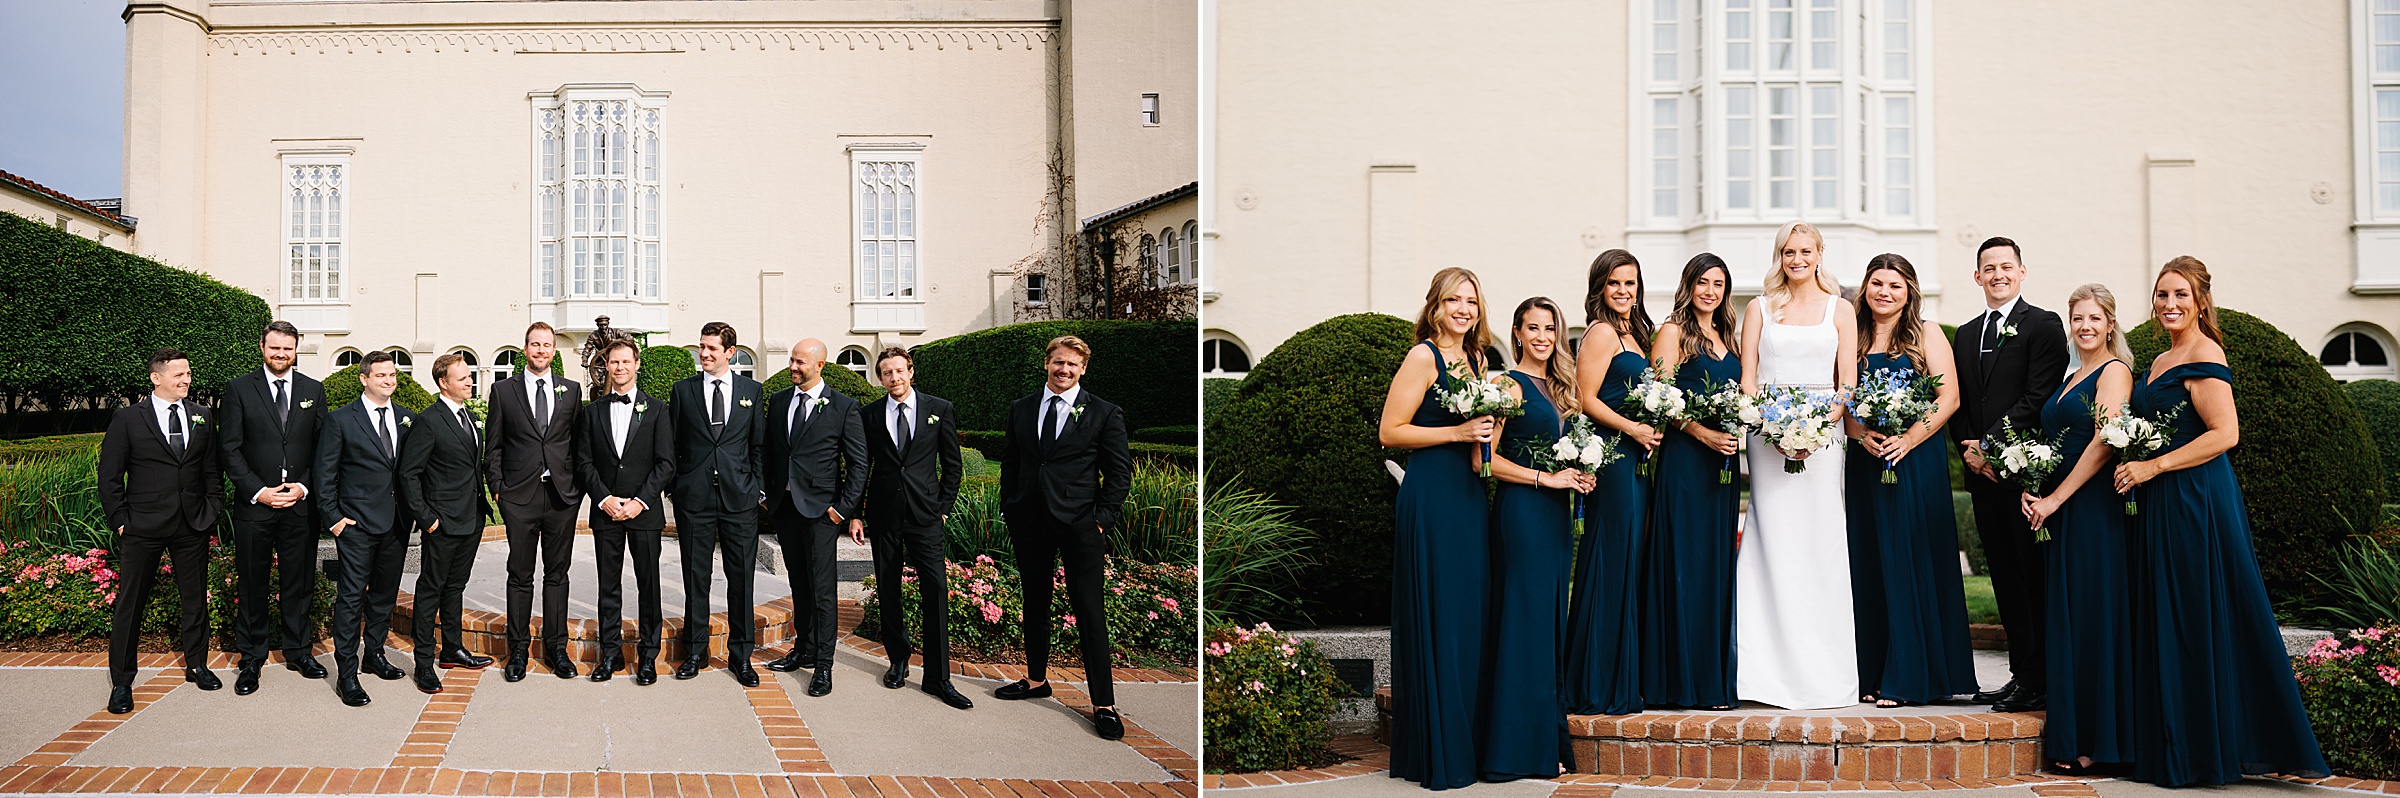 The groomsmen pose for pictures with the groom; the bridesmaids pose for a portrait with the bride at the Grosse Pointe Yacht Club by Detroit Wedding Photographer Michele Maloney